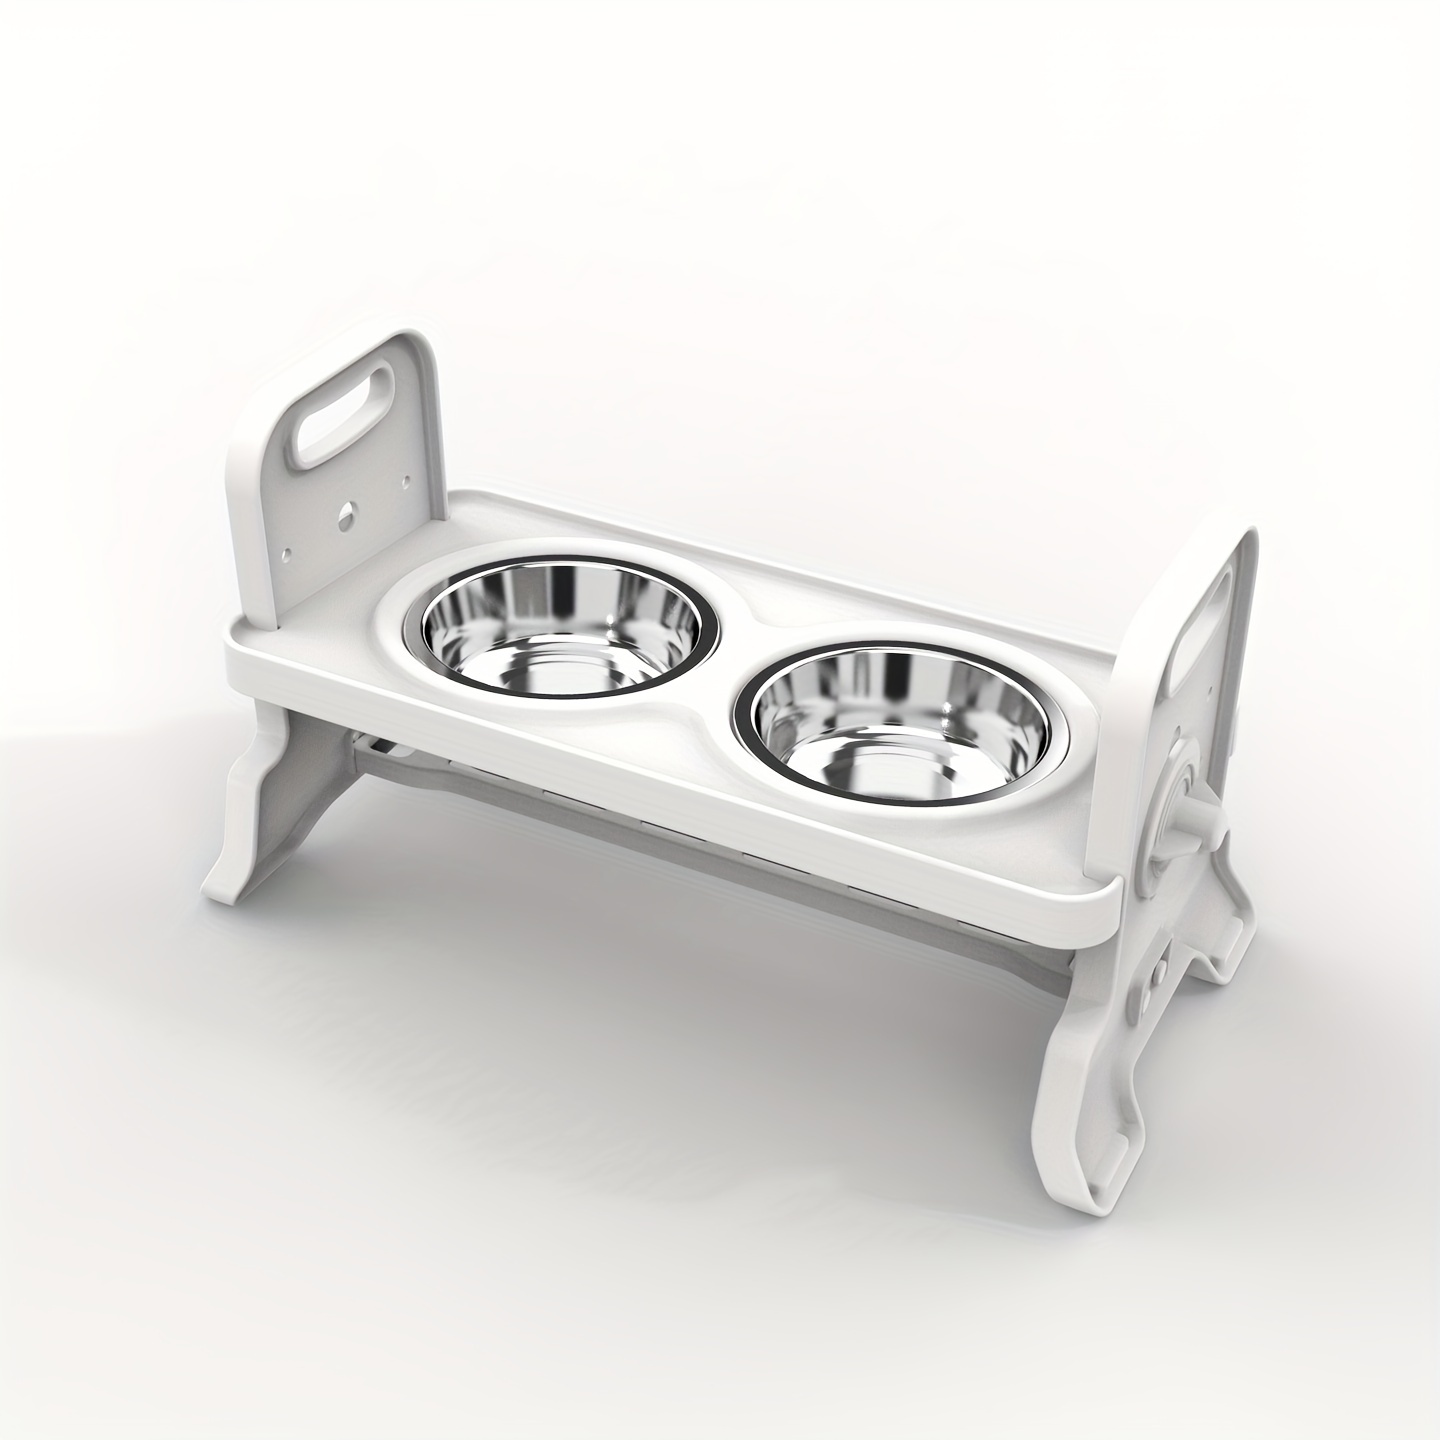 Raised Pet Bowl Holder For Cats And Small Dogs Adjustable - Temu